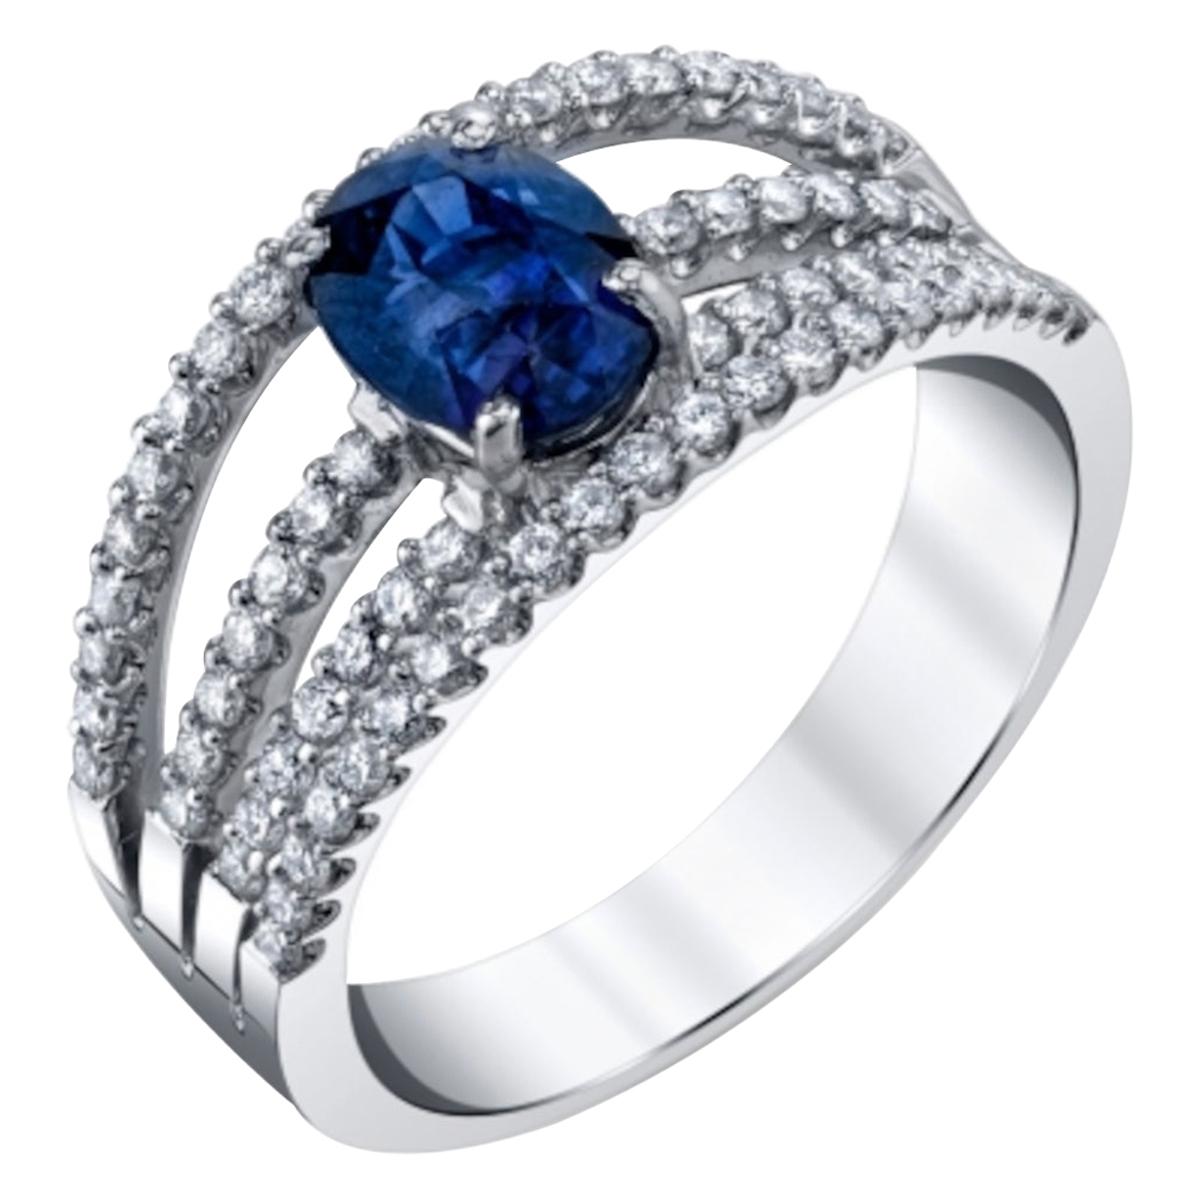 Royal Blue Sapphire and 4-Row Diamond Engagement Ring in White Gold, 1.56 Carat  For Sale